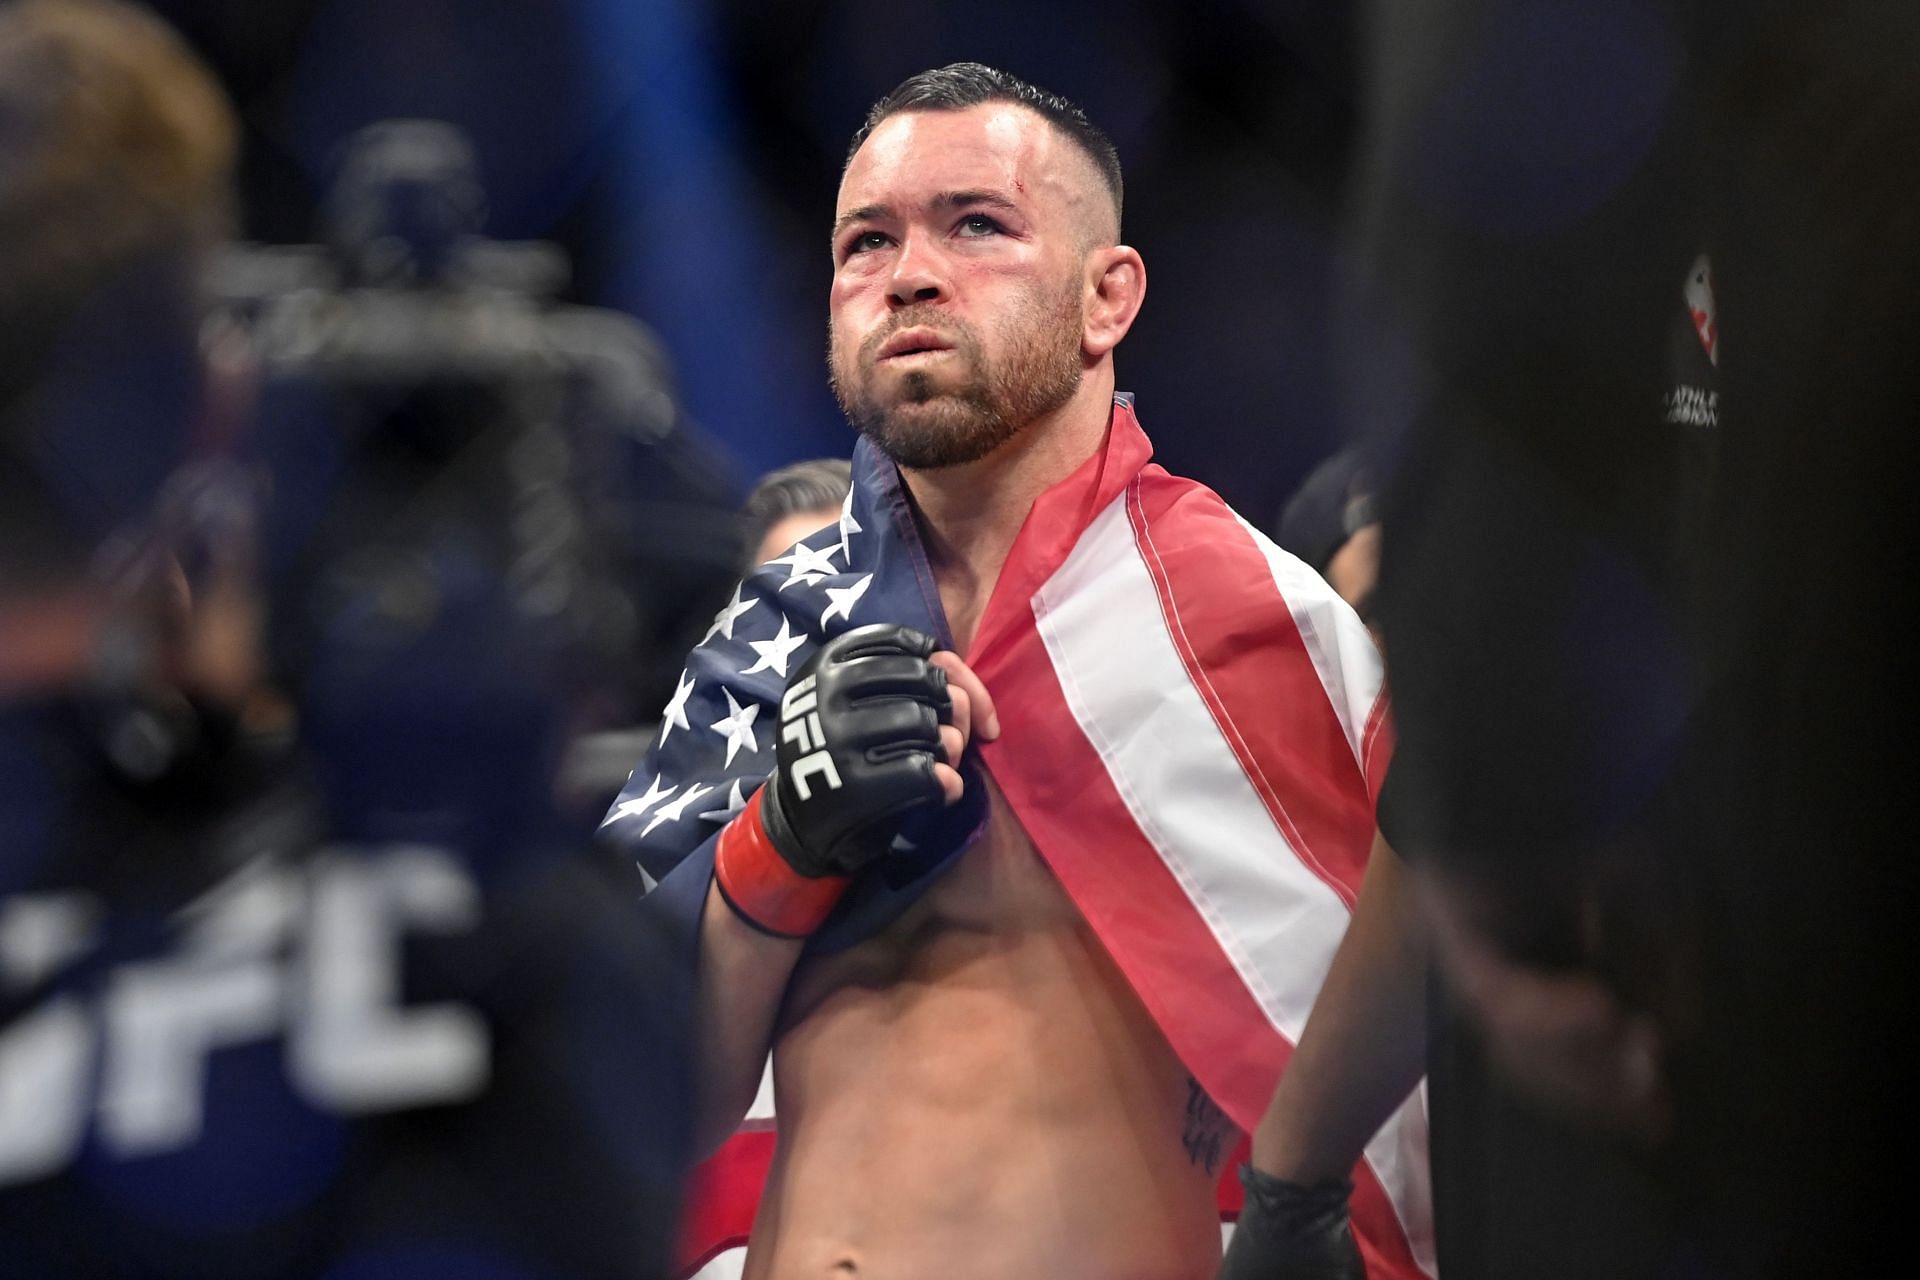 Welterweight star Colby Covington